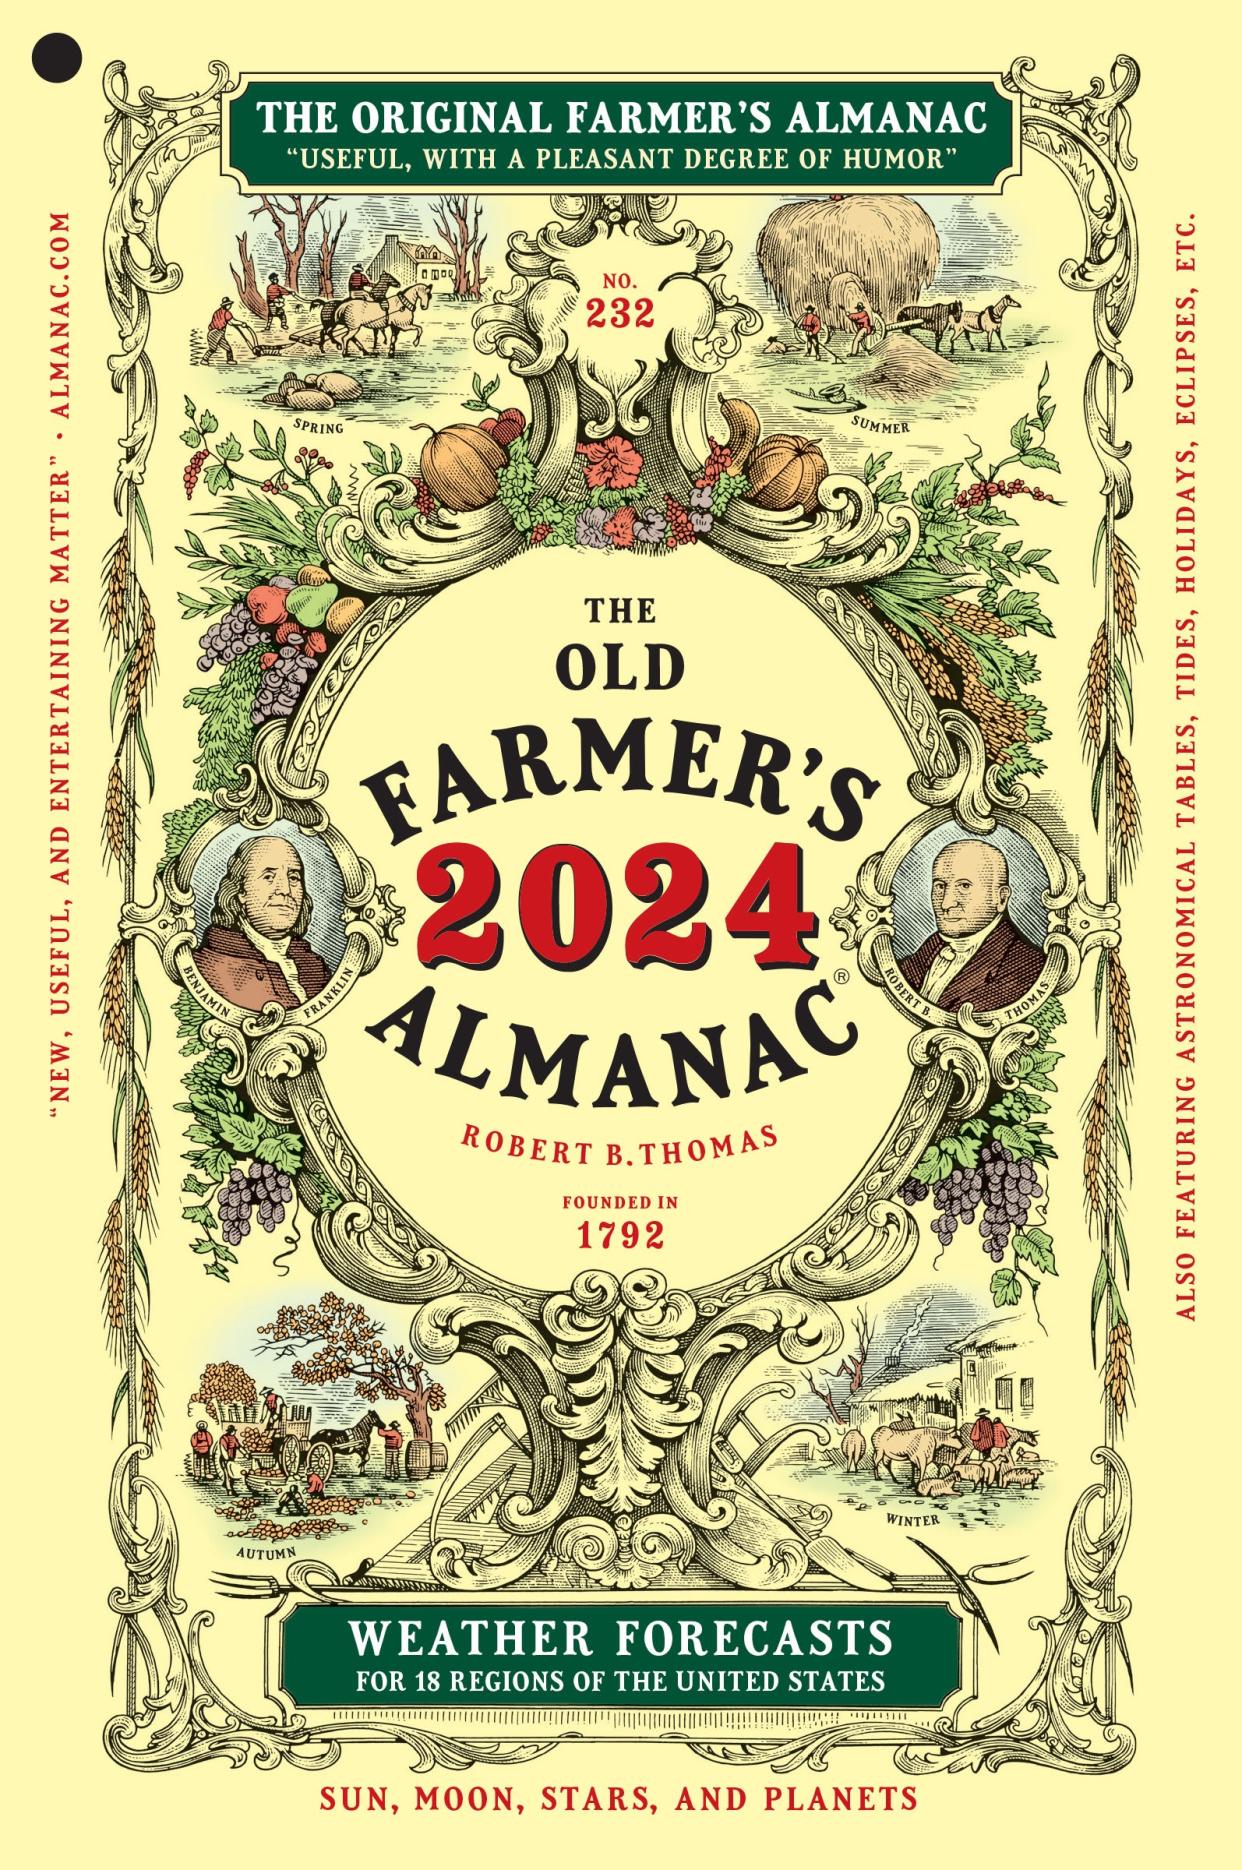 Old Farmer's Almanac says there's a chance of clouds on the day of the eclipse.